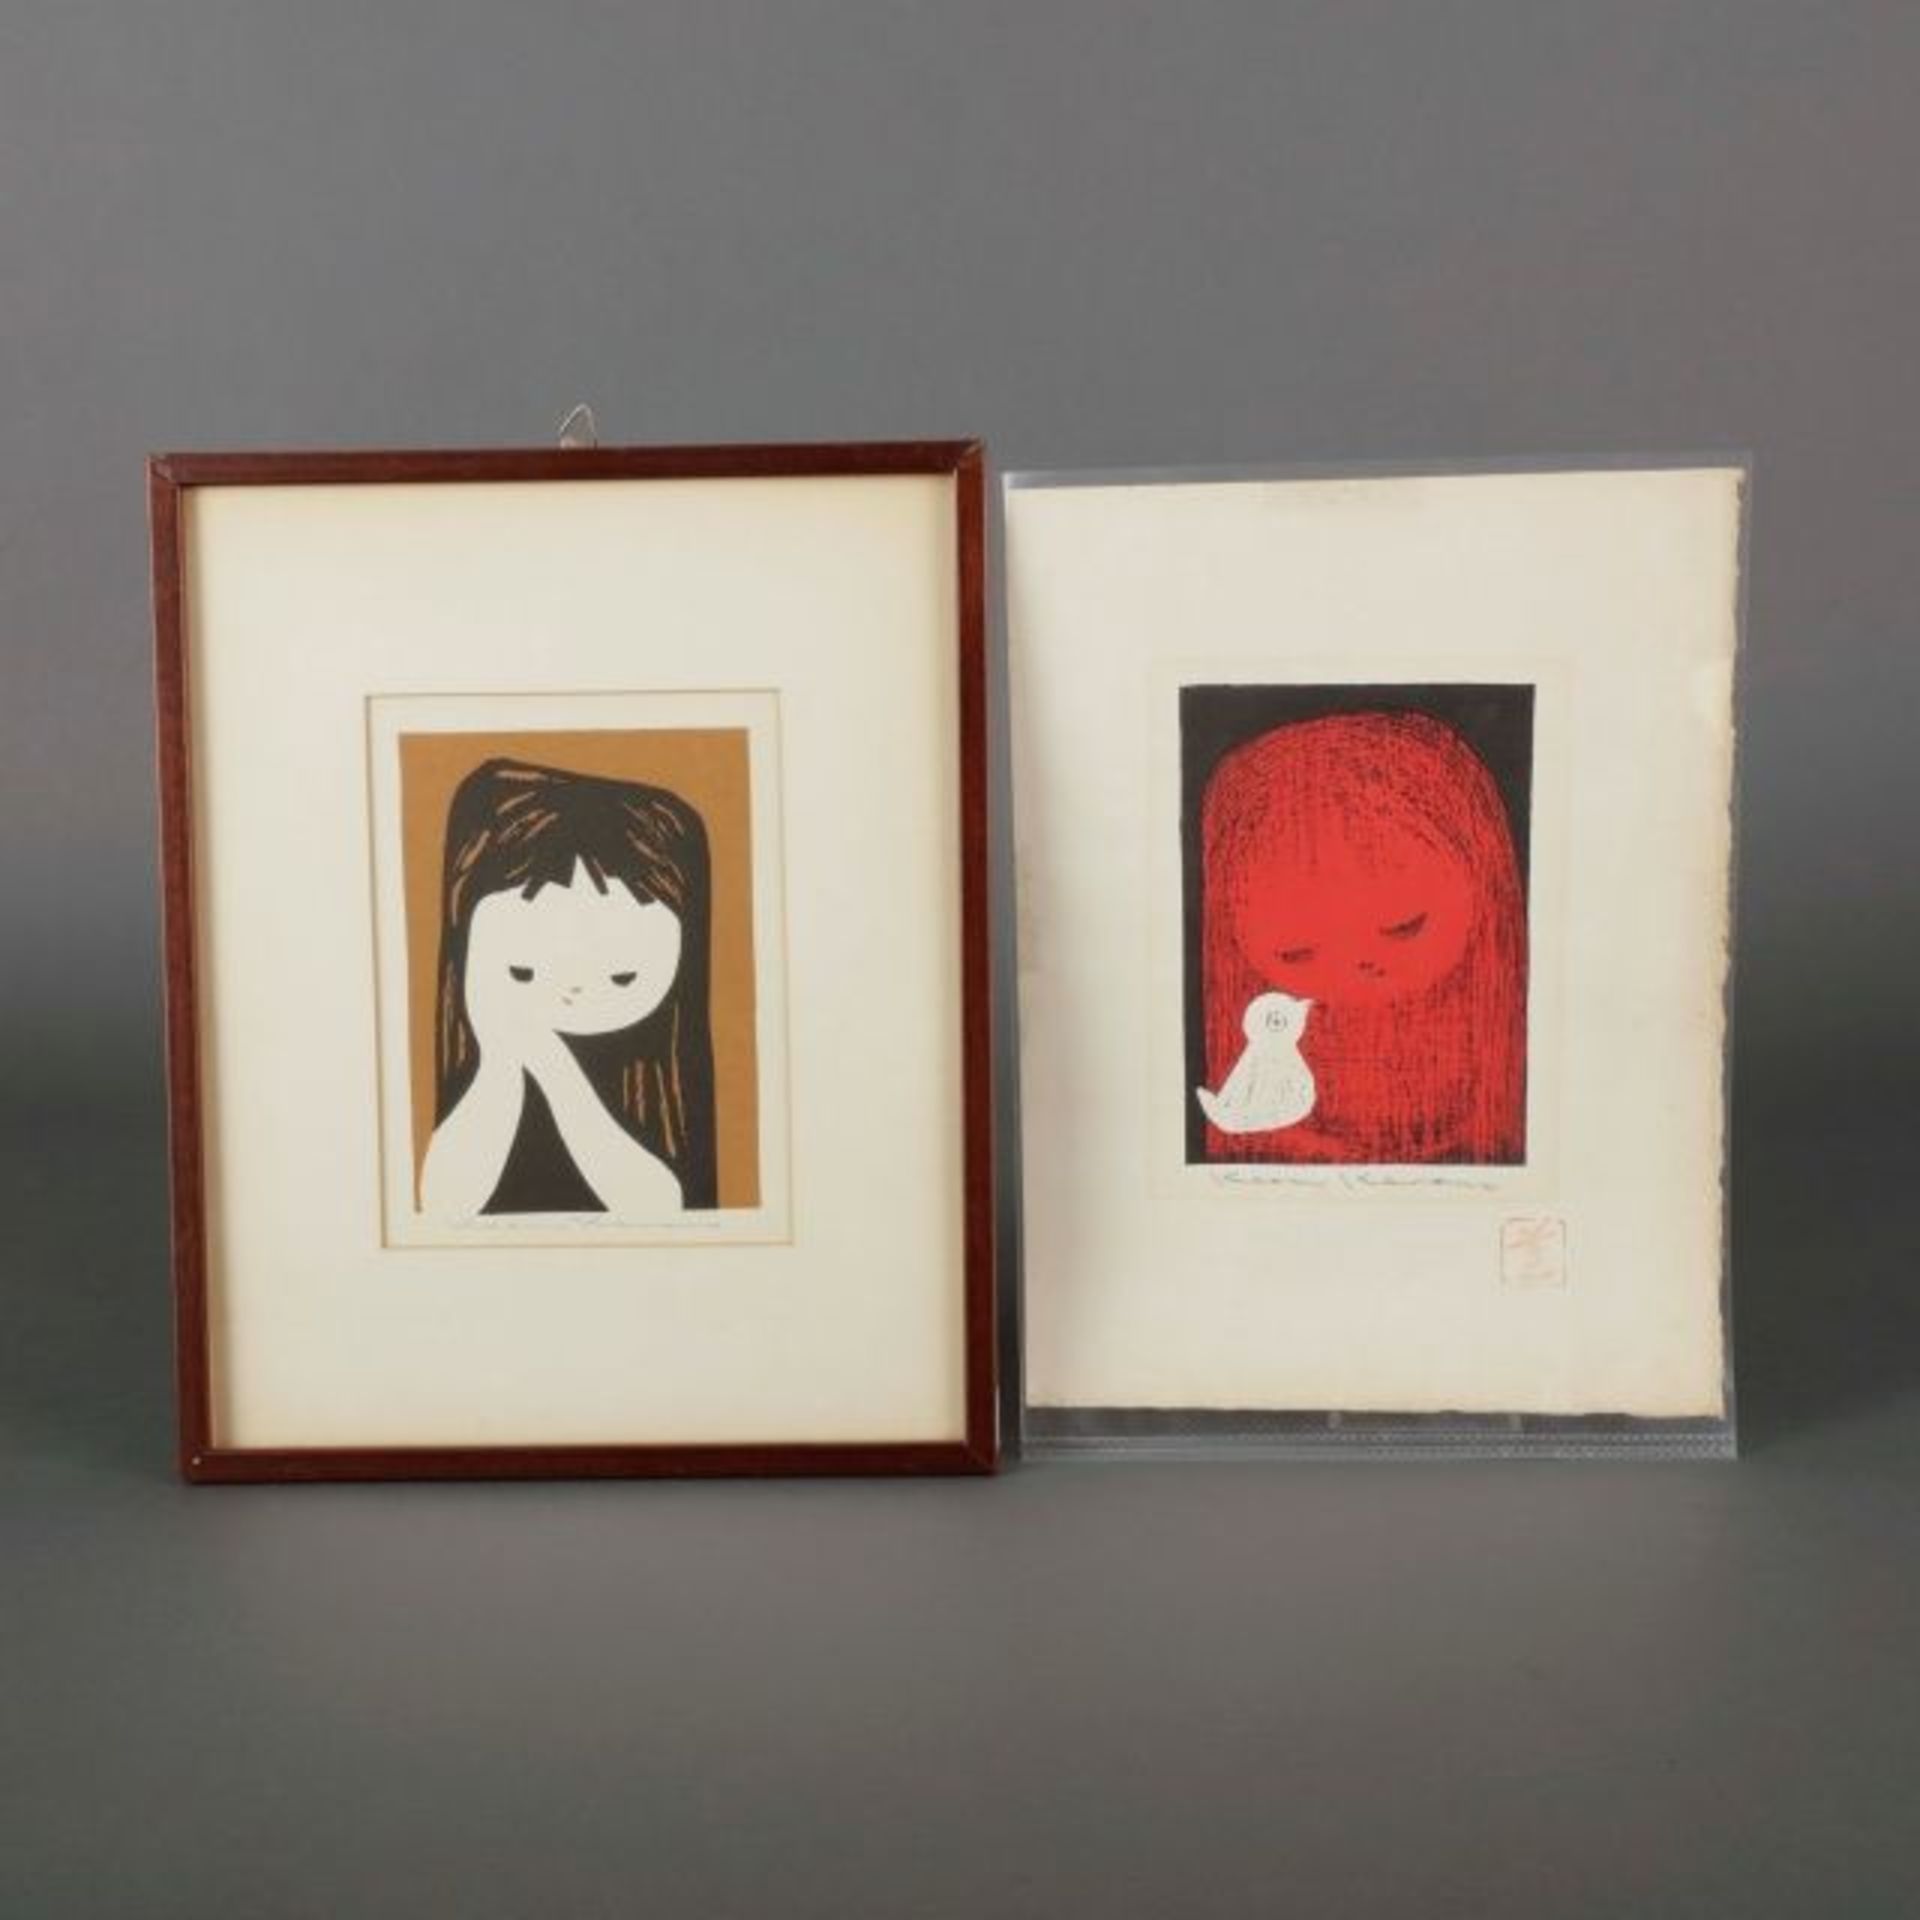 Kaoru Kawano (1916-1965), two woodblock prints: girl with her hands clasped together, and girl